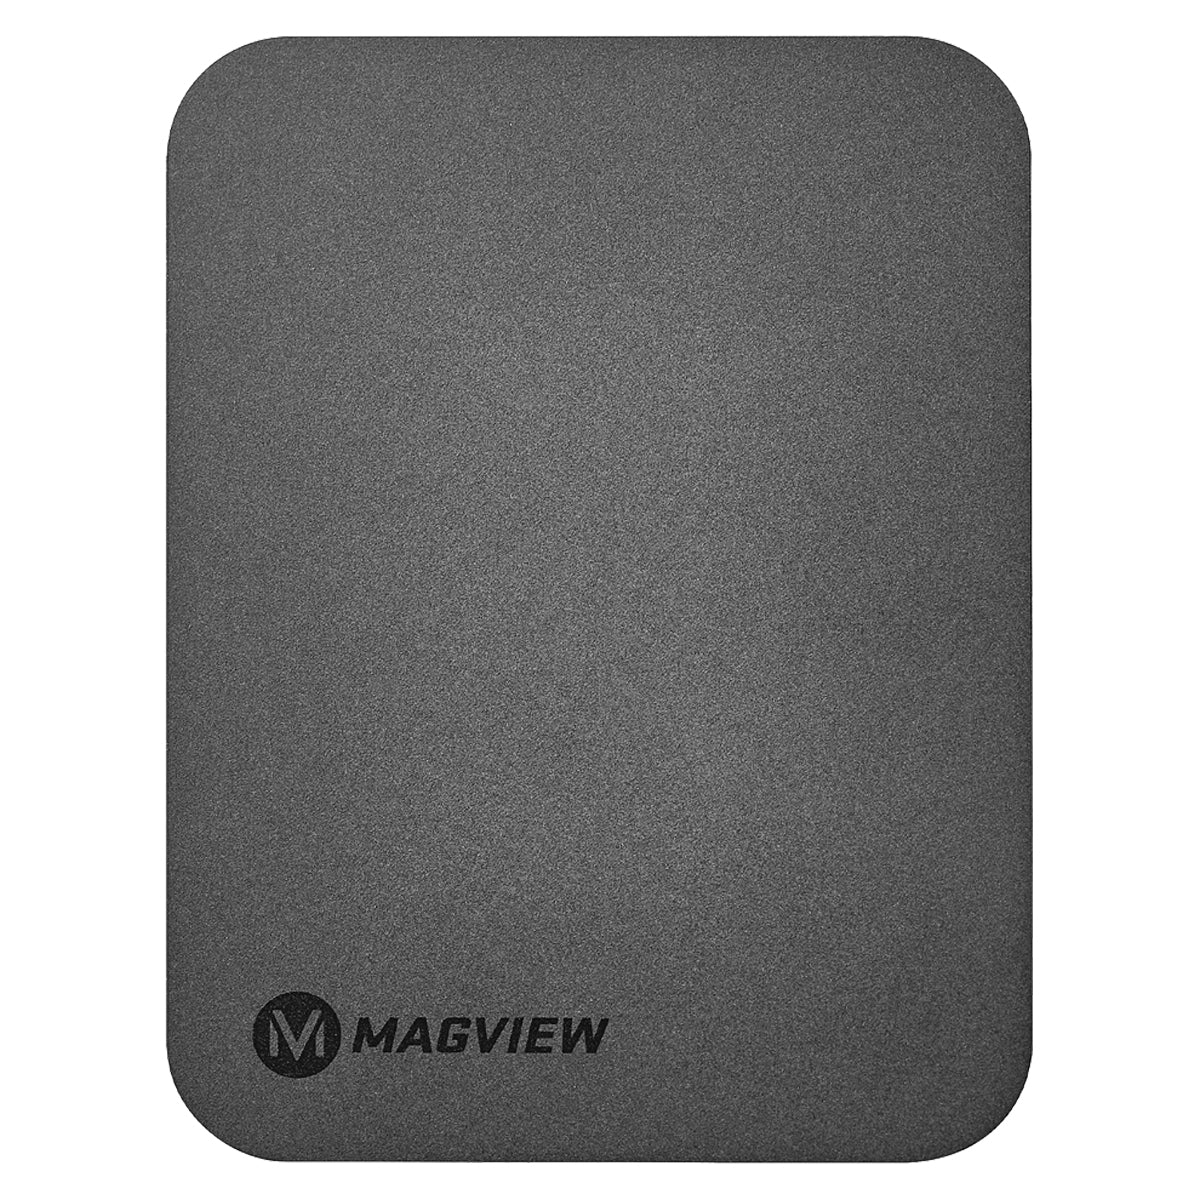 Magview Phone Plate